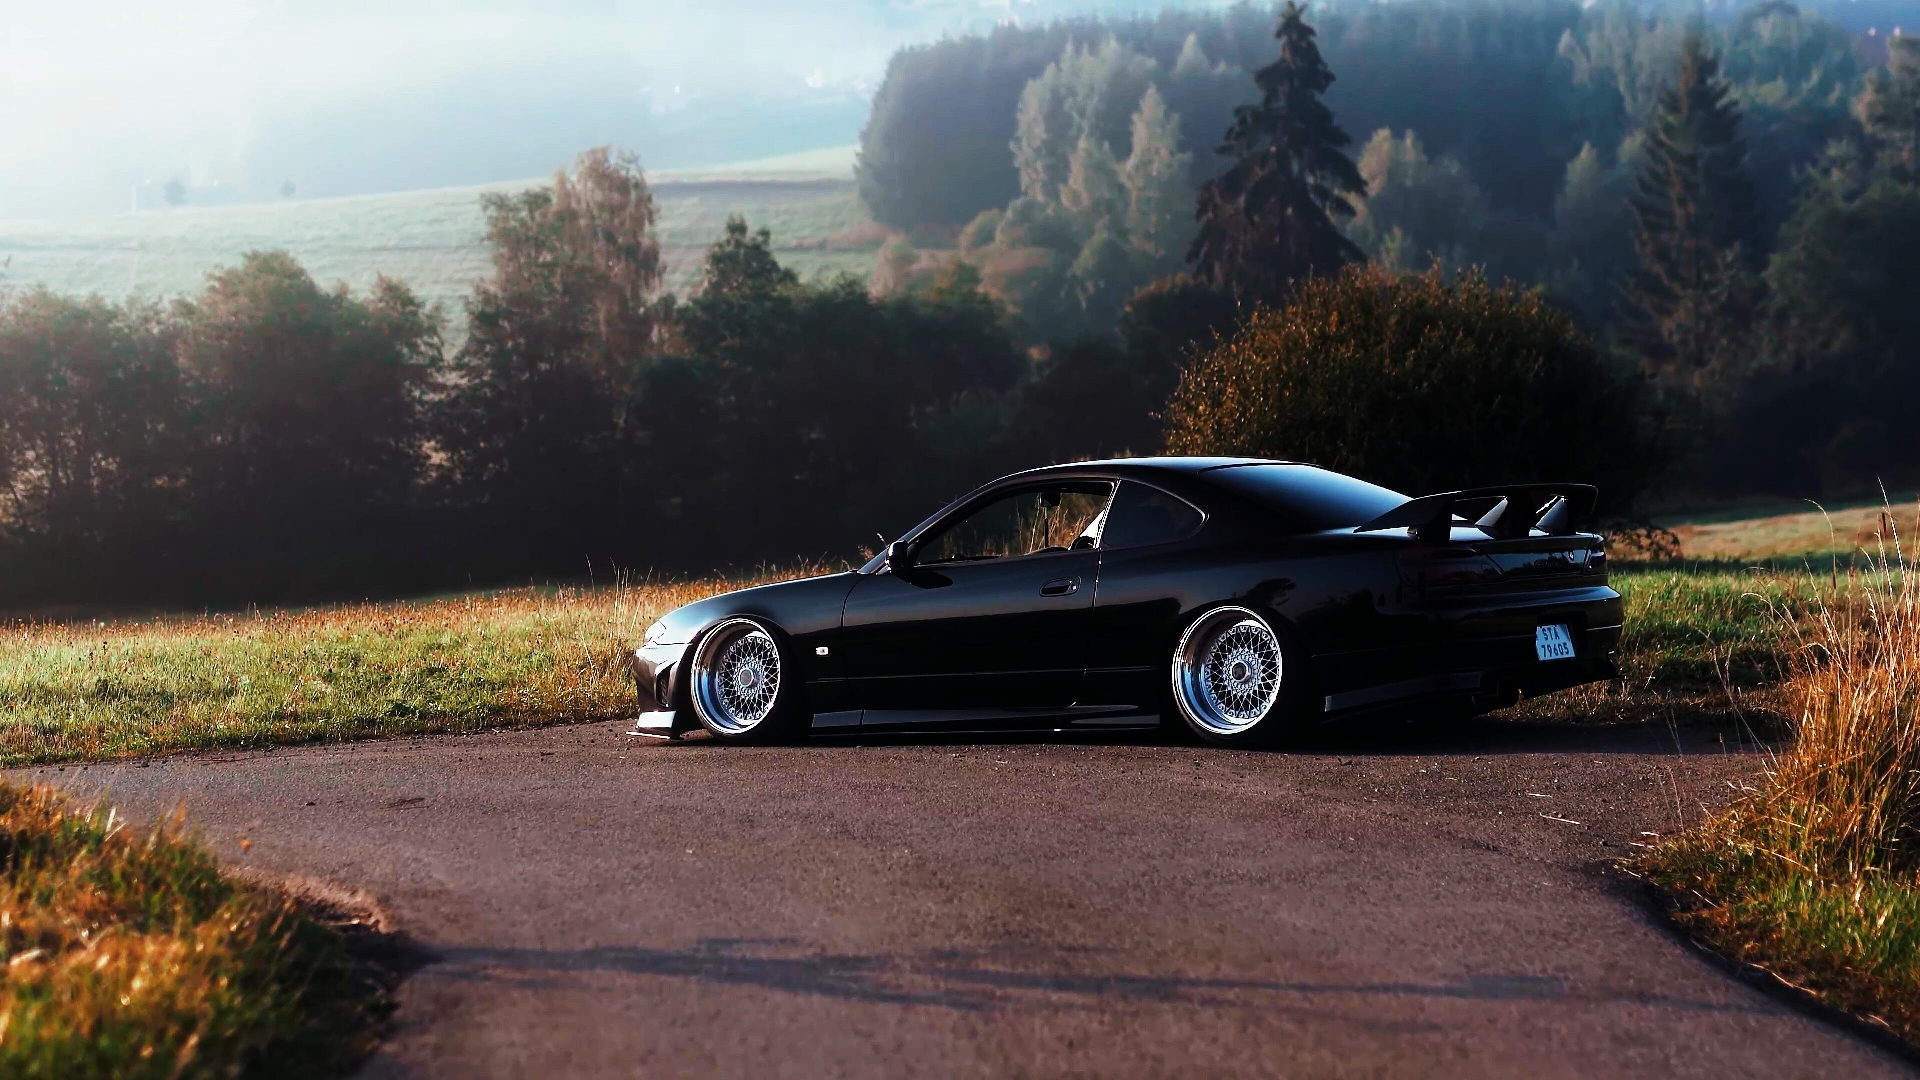 Nissan Silvia S15 Japanese Cars Car Nissan Low Car Side View Trees 1920x1080